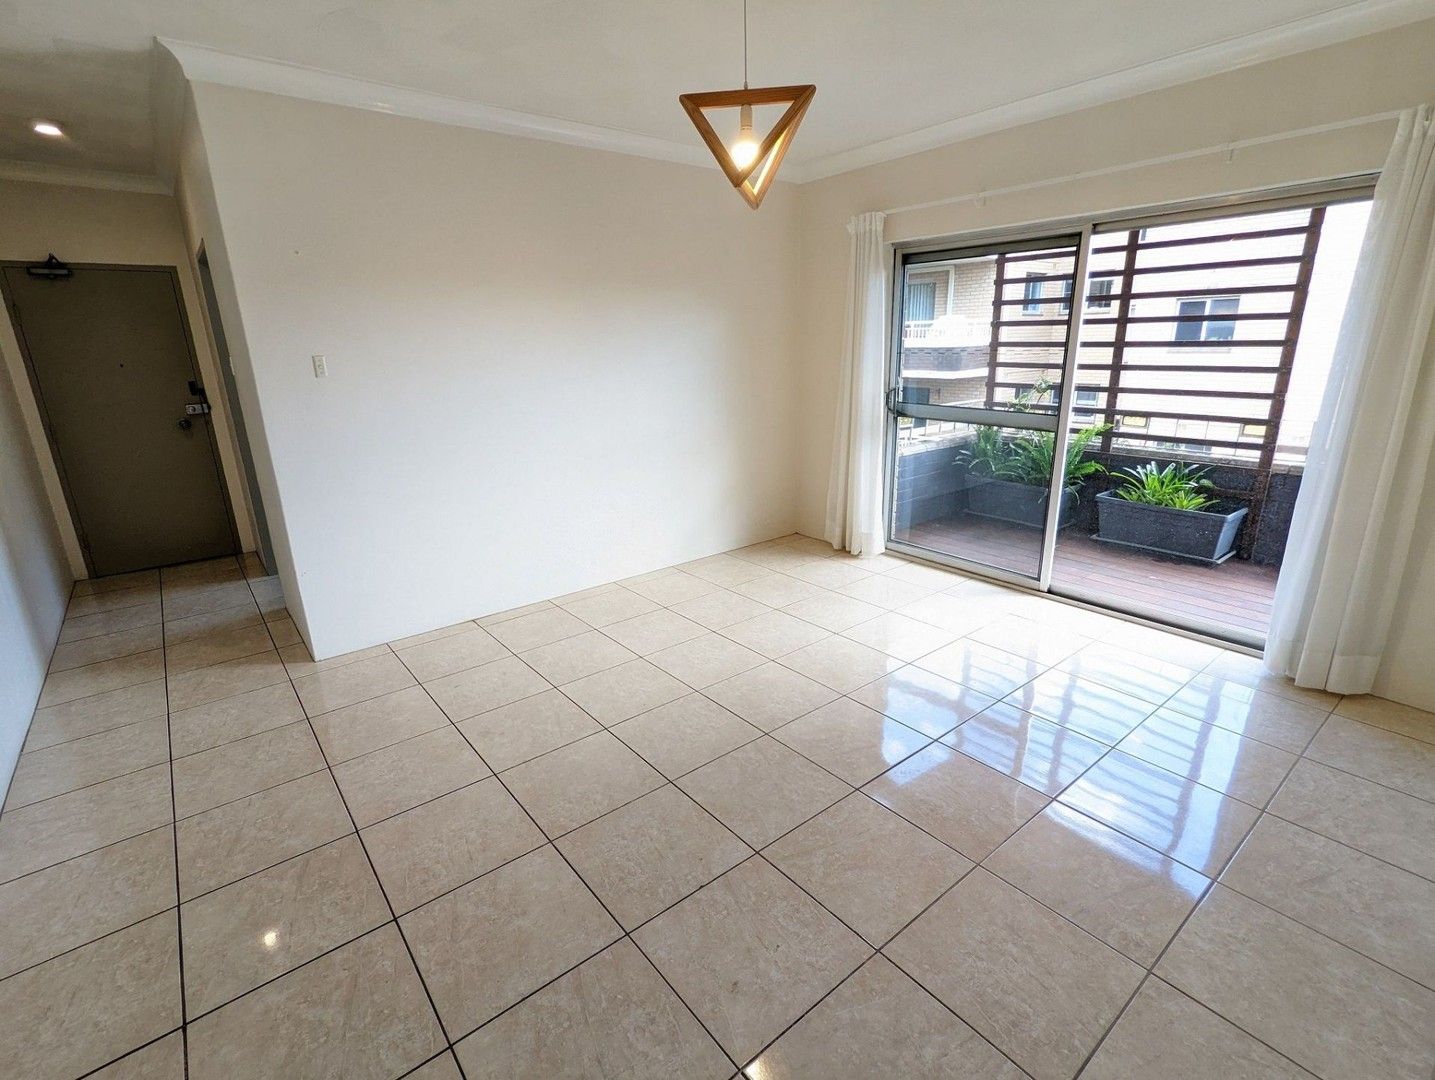 2 bedrooms Apartment / Unit / Flat in 4/25 Station Street MORTDALE NSW, 2223